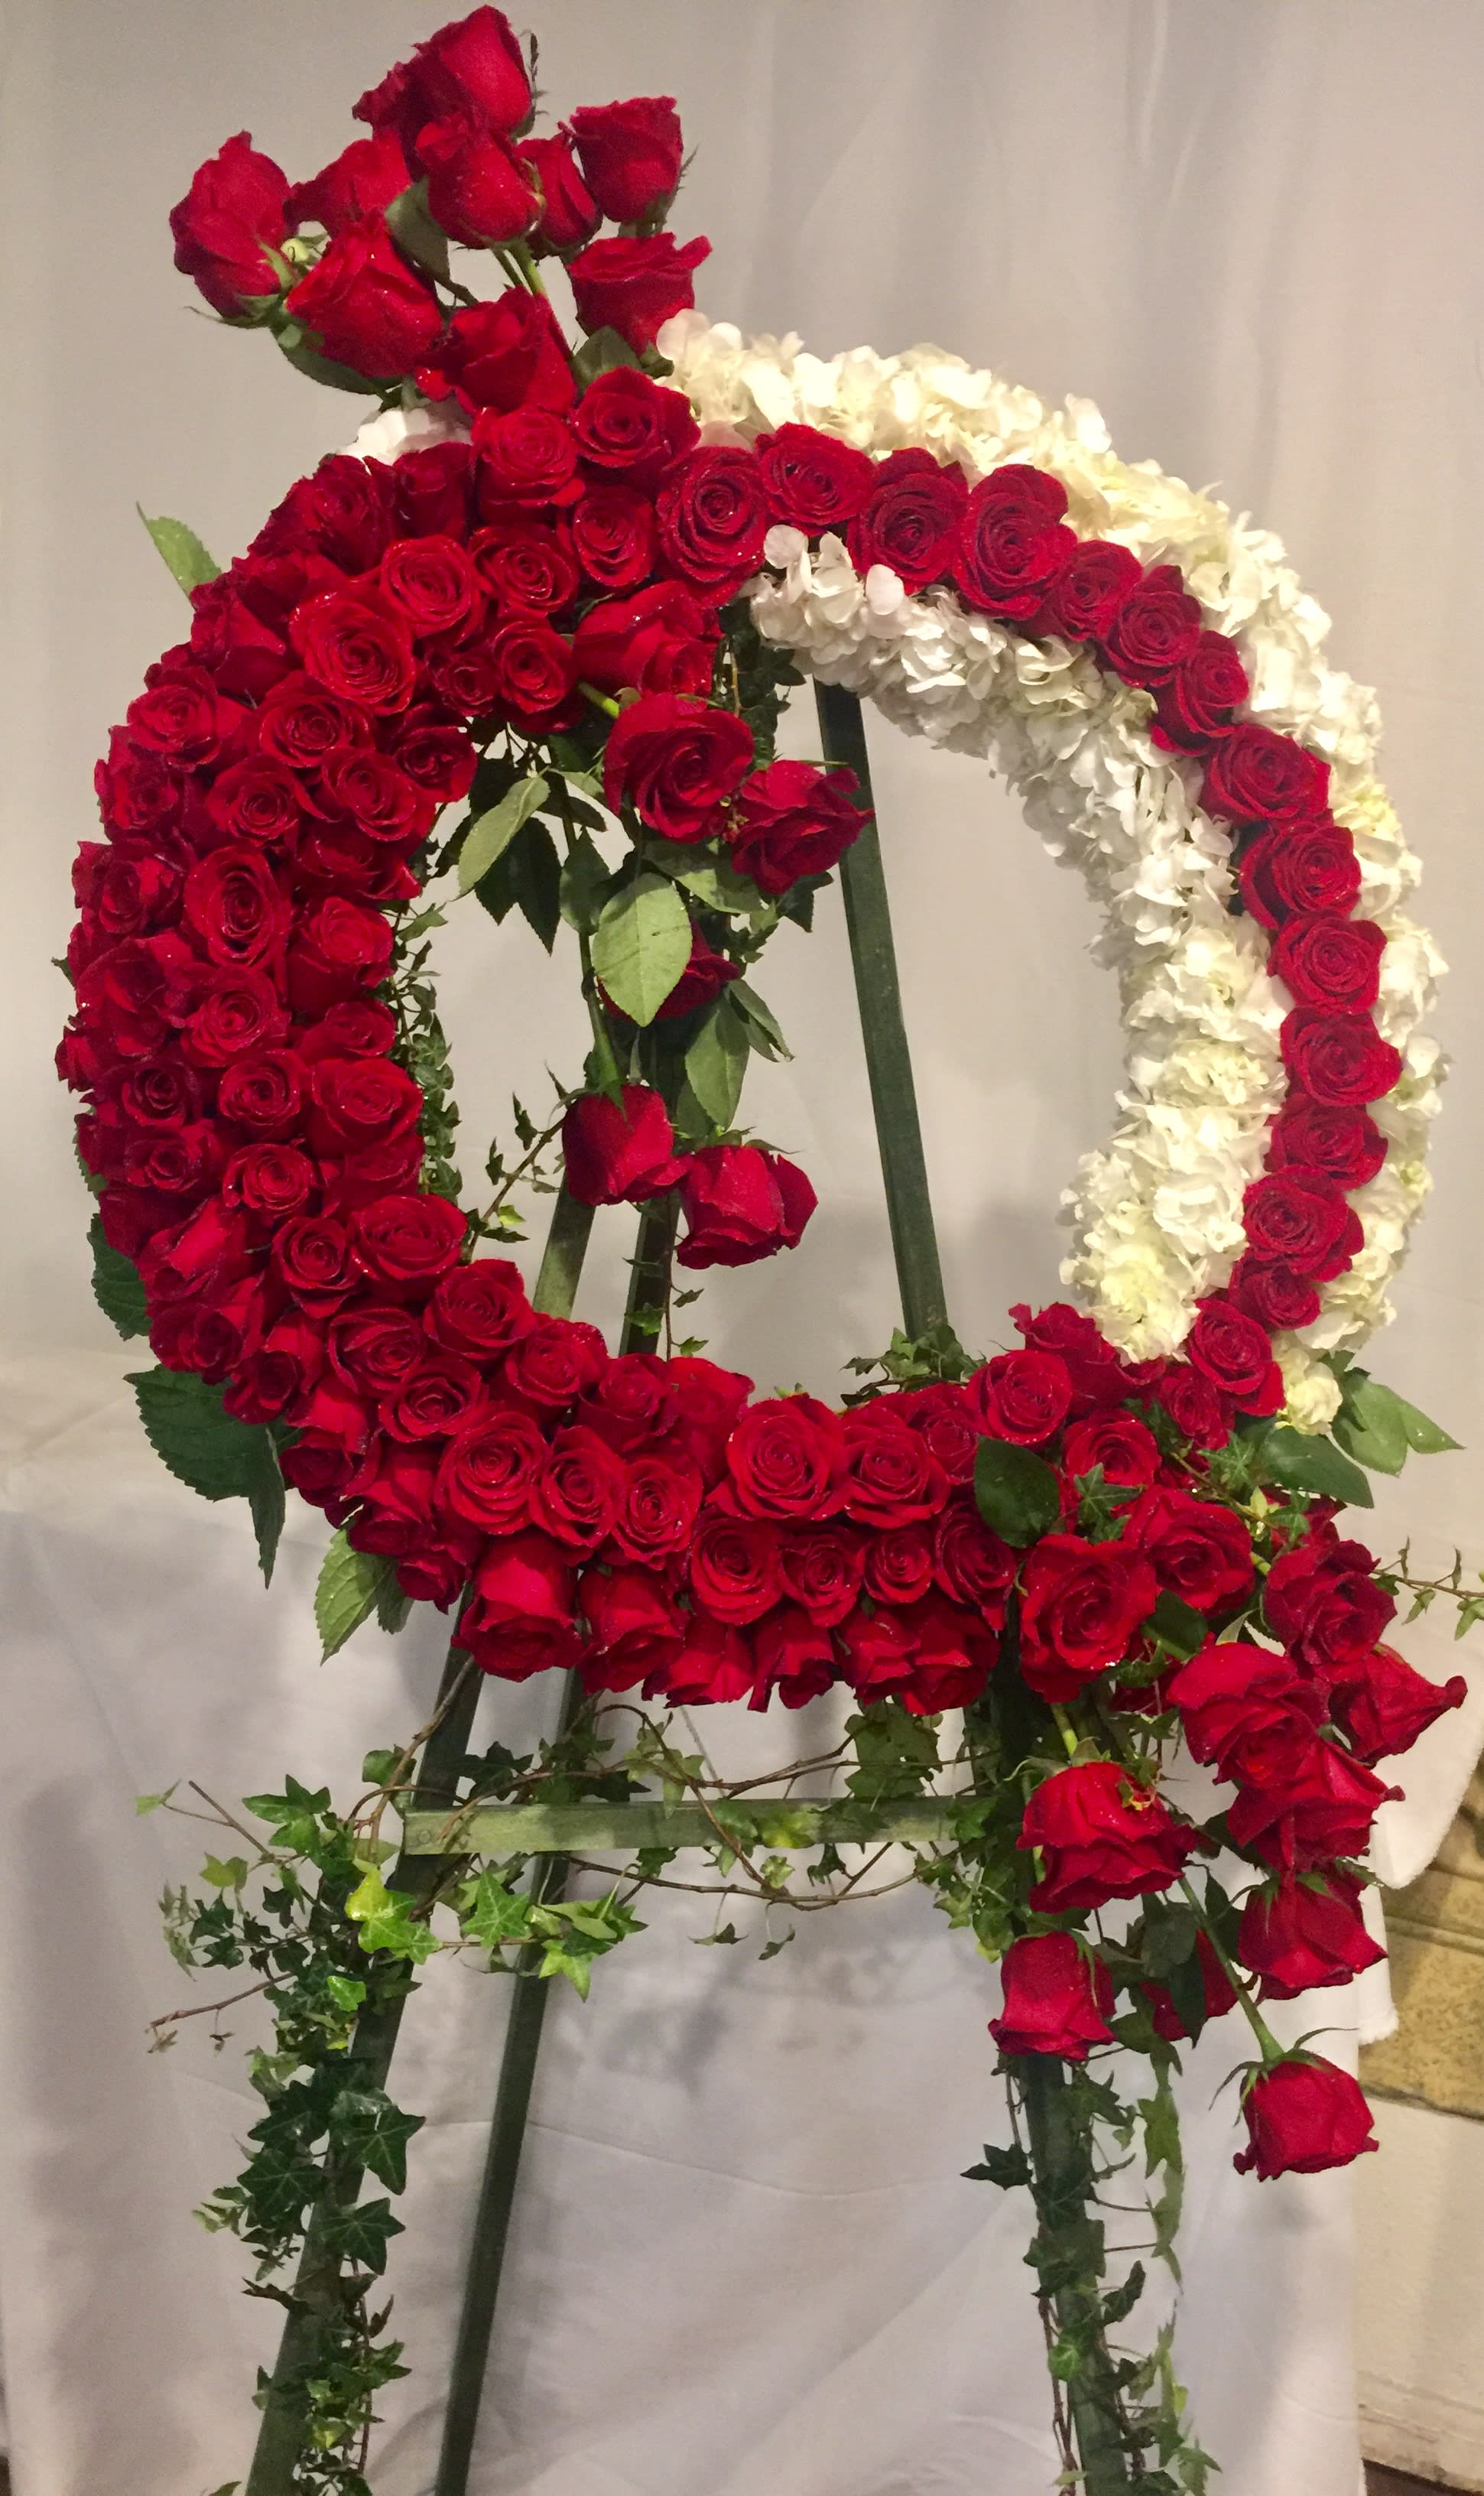 SYM01 - Red and White Wreath - The Red and White Wreath is the perfect way to honor the life of a loved one or add a touch of elegance to a special event. This stunning 24&quot; floral wreath includes a mix of red roses and white hydrangea in a handcrafted, sleek design, accented with flowing greenery. The Red and White Wreath is attached to a sturdy easel. 